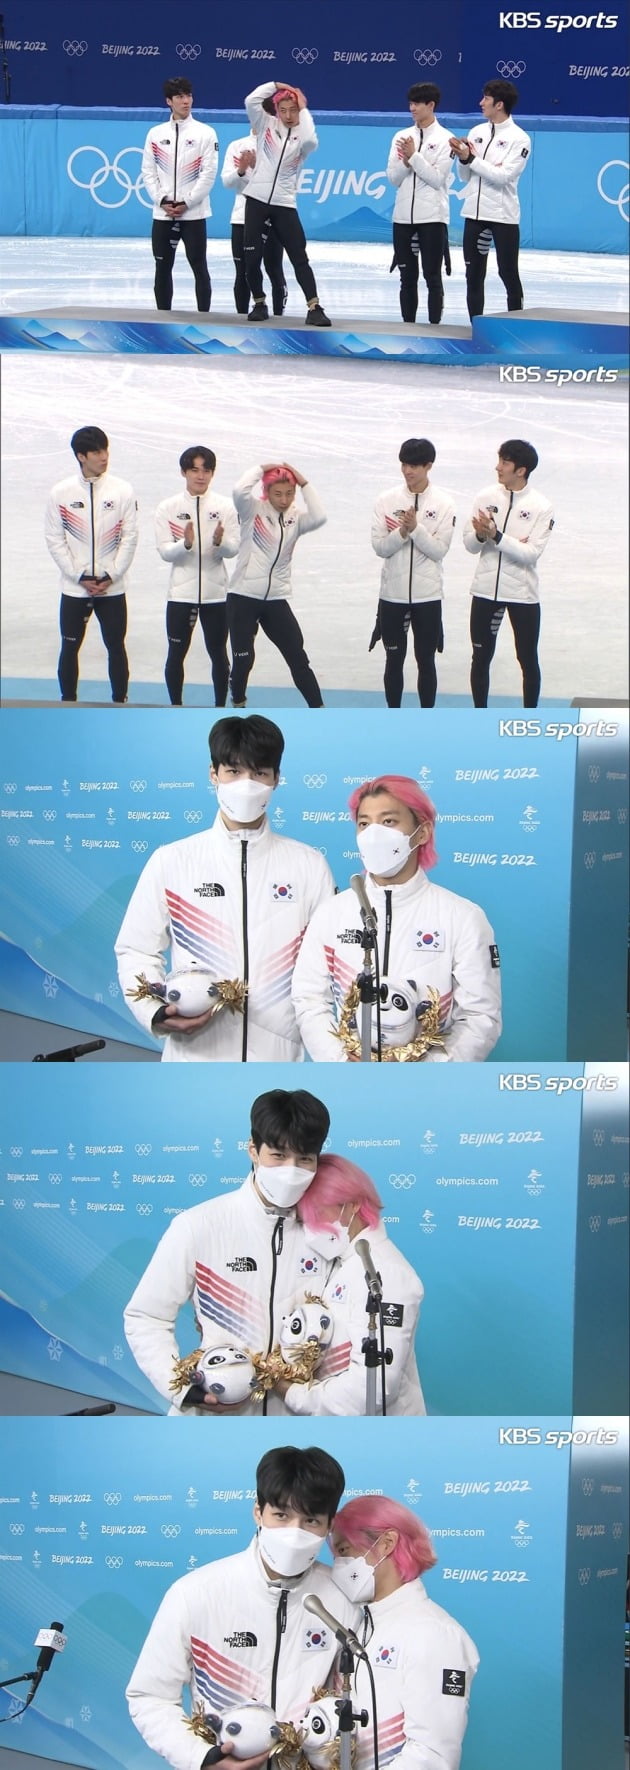 Group BTS and singer Lim Young-woong responded to the request for support of national team players, which was a cheer and encouragement for the national team players at the 2022 Beijing Winter Olympics.The Korea Short Track mens team won the silver medal in the 5000m relay of the 2022 Beijing Winter Olympics held on the 16th.At the ceremony after Kyonggi, Kwak Yoon-gy climbed the podium and performed a ceremony for BTSs Dynamite choreography.In an interview after the ceremony, Kwak Yoon-gy said, I danced a little bit of BTS.When we were in a difficult time at the beginning of the Olympics due to biased judgment, I did not receive it myself, but Daeheon was very comforted by RM and I thought I should repay it. Kwak Yoon-gy said, Of course I agreed with the team members that I could do last dance because I expected to not go.Hwang Dae-heon said, I would like to say thank you to RM and Jen for supporting me a lot.RM wrote on his 17th instagram story that he was Kwak Yoon-gy in the ceremony after short track Kyonggi, and wrote Yoongi dynamite well.Also, along with a photo of Suga, a member, wrote, I would like to ask our Yoongi brother well. It was a witty comment that made use of Sugas real name as Min Yungi.Earlier, RM encouraged Hwang Dae-heon through Instagram at the time of the short track mens 1000m semi-final, which was suspected of bias.Hwang Dae-heon posted a video of Hwang Dae-heons overtaking scene, leaving a message of support, saying, RESPECT, when Hwang Dae-heon won the gold medal in the 1500m event.Netizens are also enjoying Kwak Yoon-gys BTS dance ceremony by guessing that I learned choreography from Yubin Lee.Because Yubin Lee is a fan of BTS, Ami; Yubin Lee has a fan cafe called BlaBlaBus, via Kwak Yoon-gys YouTube channel content.I think fans can upload my story at the Beijing Olympics, and even then, I would like to write a comment, he said.Another member of BTS, Suga, also cheered on short-track national players.Suga wrote on her Instagram account that she done my best in the short track womens 1500m final video.Singer Lim Young-woong curling national team Kim gave a message of support and gave strength.Lim Young-woong posted a video on his 16th day of his instagram saying, I was called by Kim Eun-jung and I was hoping that my support would be a little cheered up.Kim Eun-jung, a skip of Tim Kim, confessed his fanship toward Lim Young-woong in an interview released on Naver TVs MBC channel.Kim Eun-jung said, I want to be supported by Lim Young-woong. Lim Young-woong, please support me a lot of curling.The shy girl fan, who is not the appearance of a cool and iron skip on the ice, has also created a familiarity.Lim Young-woong said in a video on Instagram, I do not have much left for all the Olympic events including Tim Kims curling, but do not get hurt until the end and please smile when you come in regardless of the result.Everyone cheers you up, he said. I hope Kim Eun-jung, Tim Kim, and all the national team members will fight to the end.The shy fanship of the national delegates and the stars who responded to such fanship with national support. The top stars in each field who give and receive national support are warm.